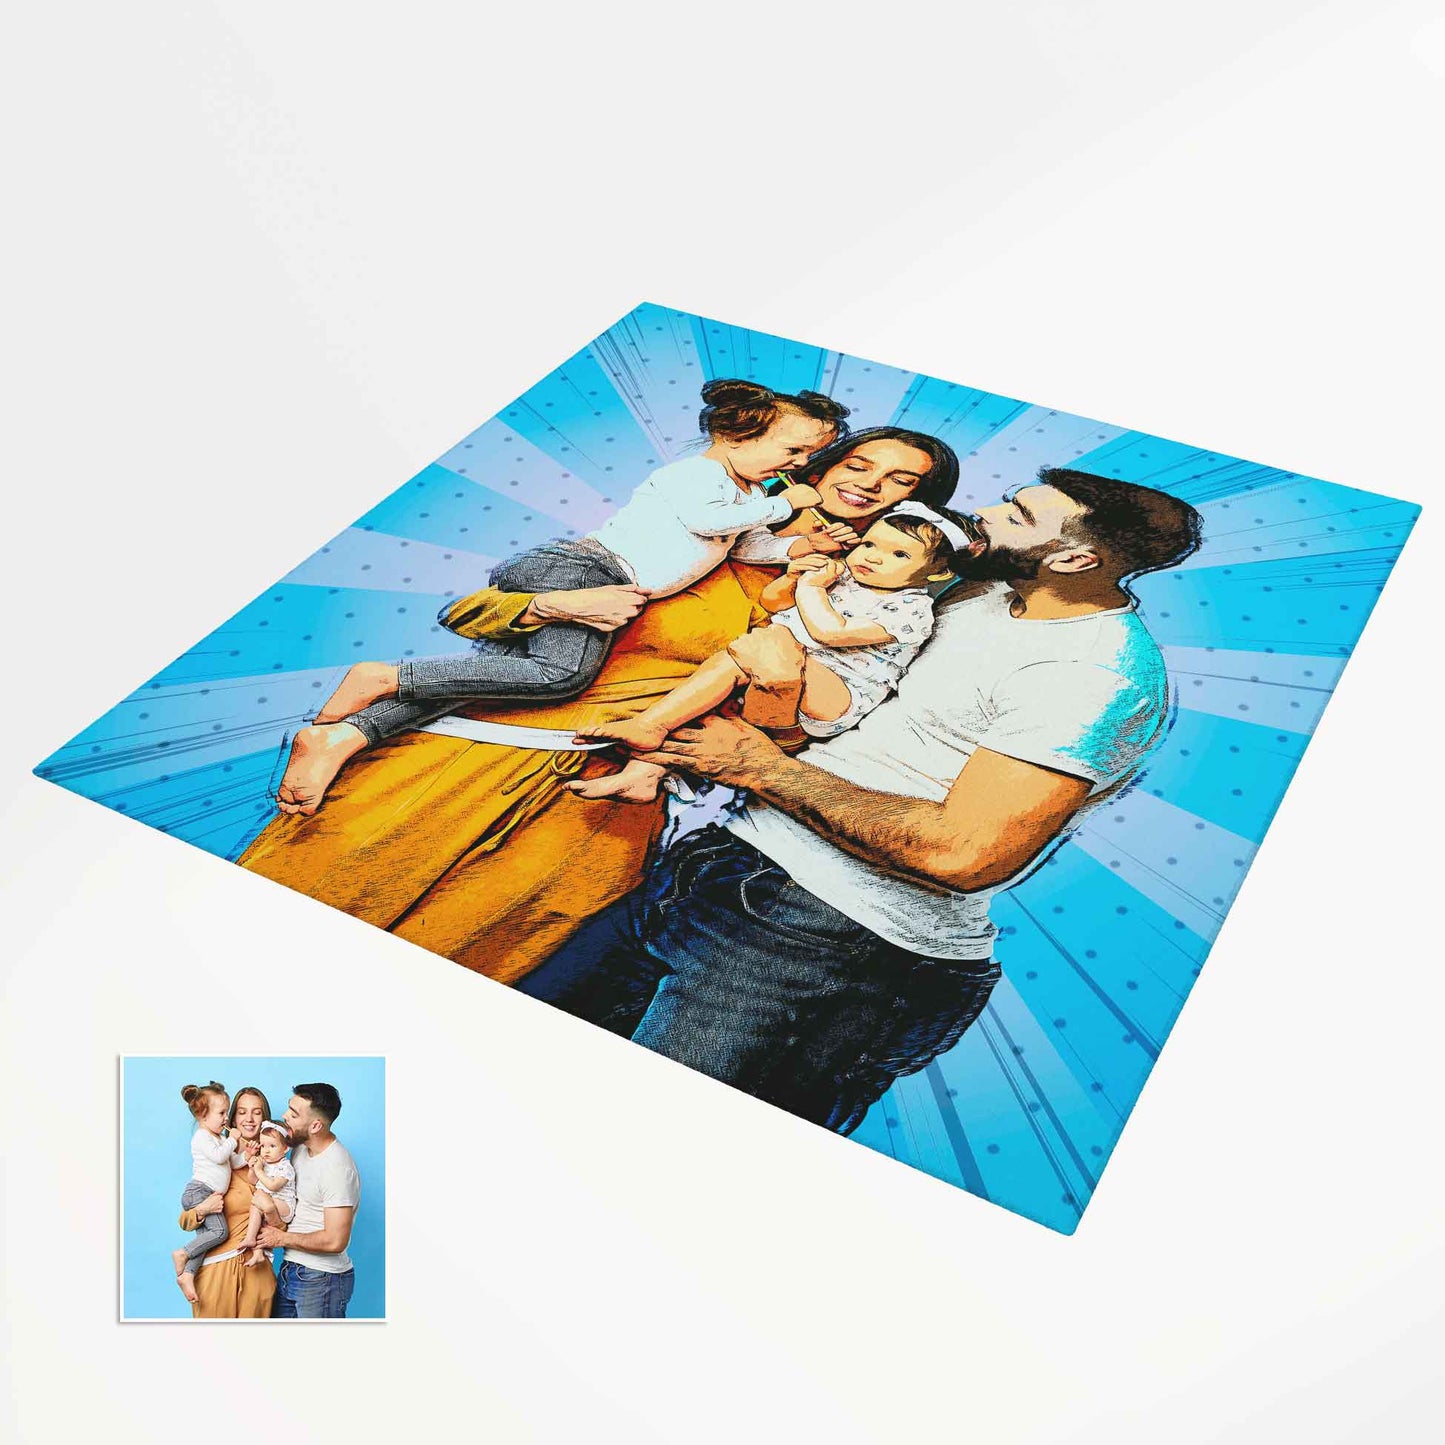 Get lost in the pages of childhood with our Personalised Cartoon Comics Photo Rug! Create your own comic-inspired masterpiece.